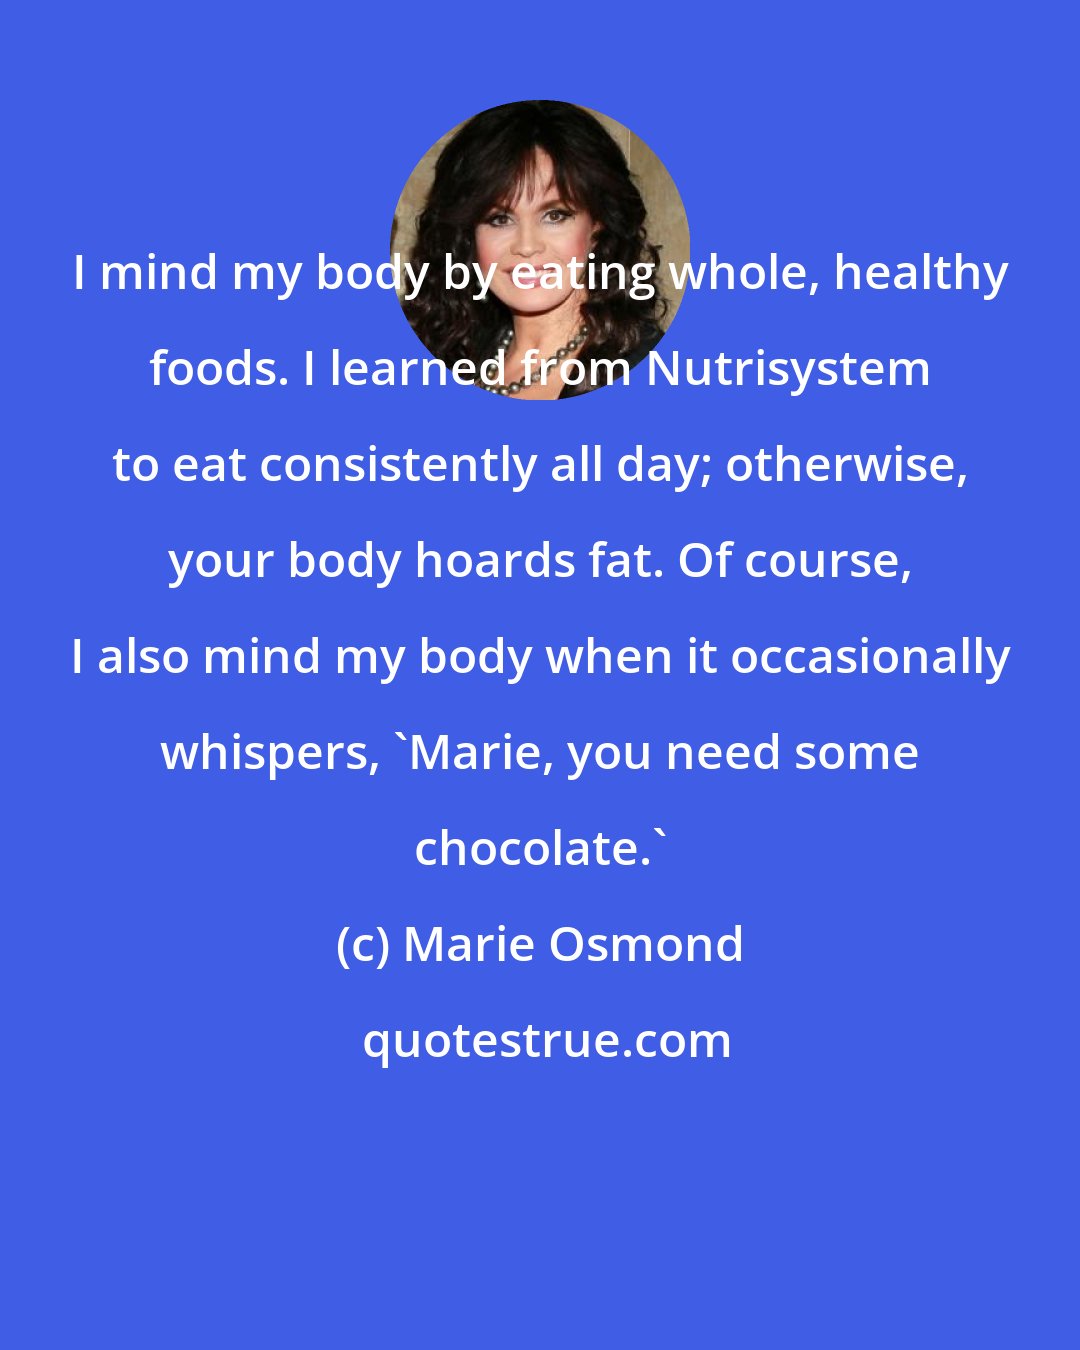 Marie Osmond: I mind my body by eating whole, healthy foods. I learned from Nutrisystem to eat consistently all day; otherwise, your body hoards fat. Of course, I also mind my body when it occasionally whispers, 'Marie, you need some chocolate.'